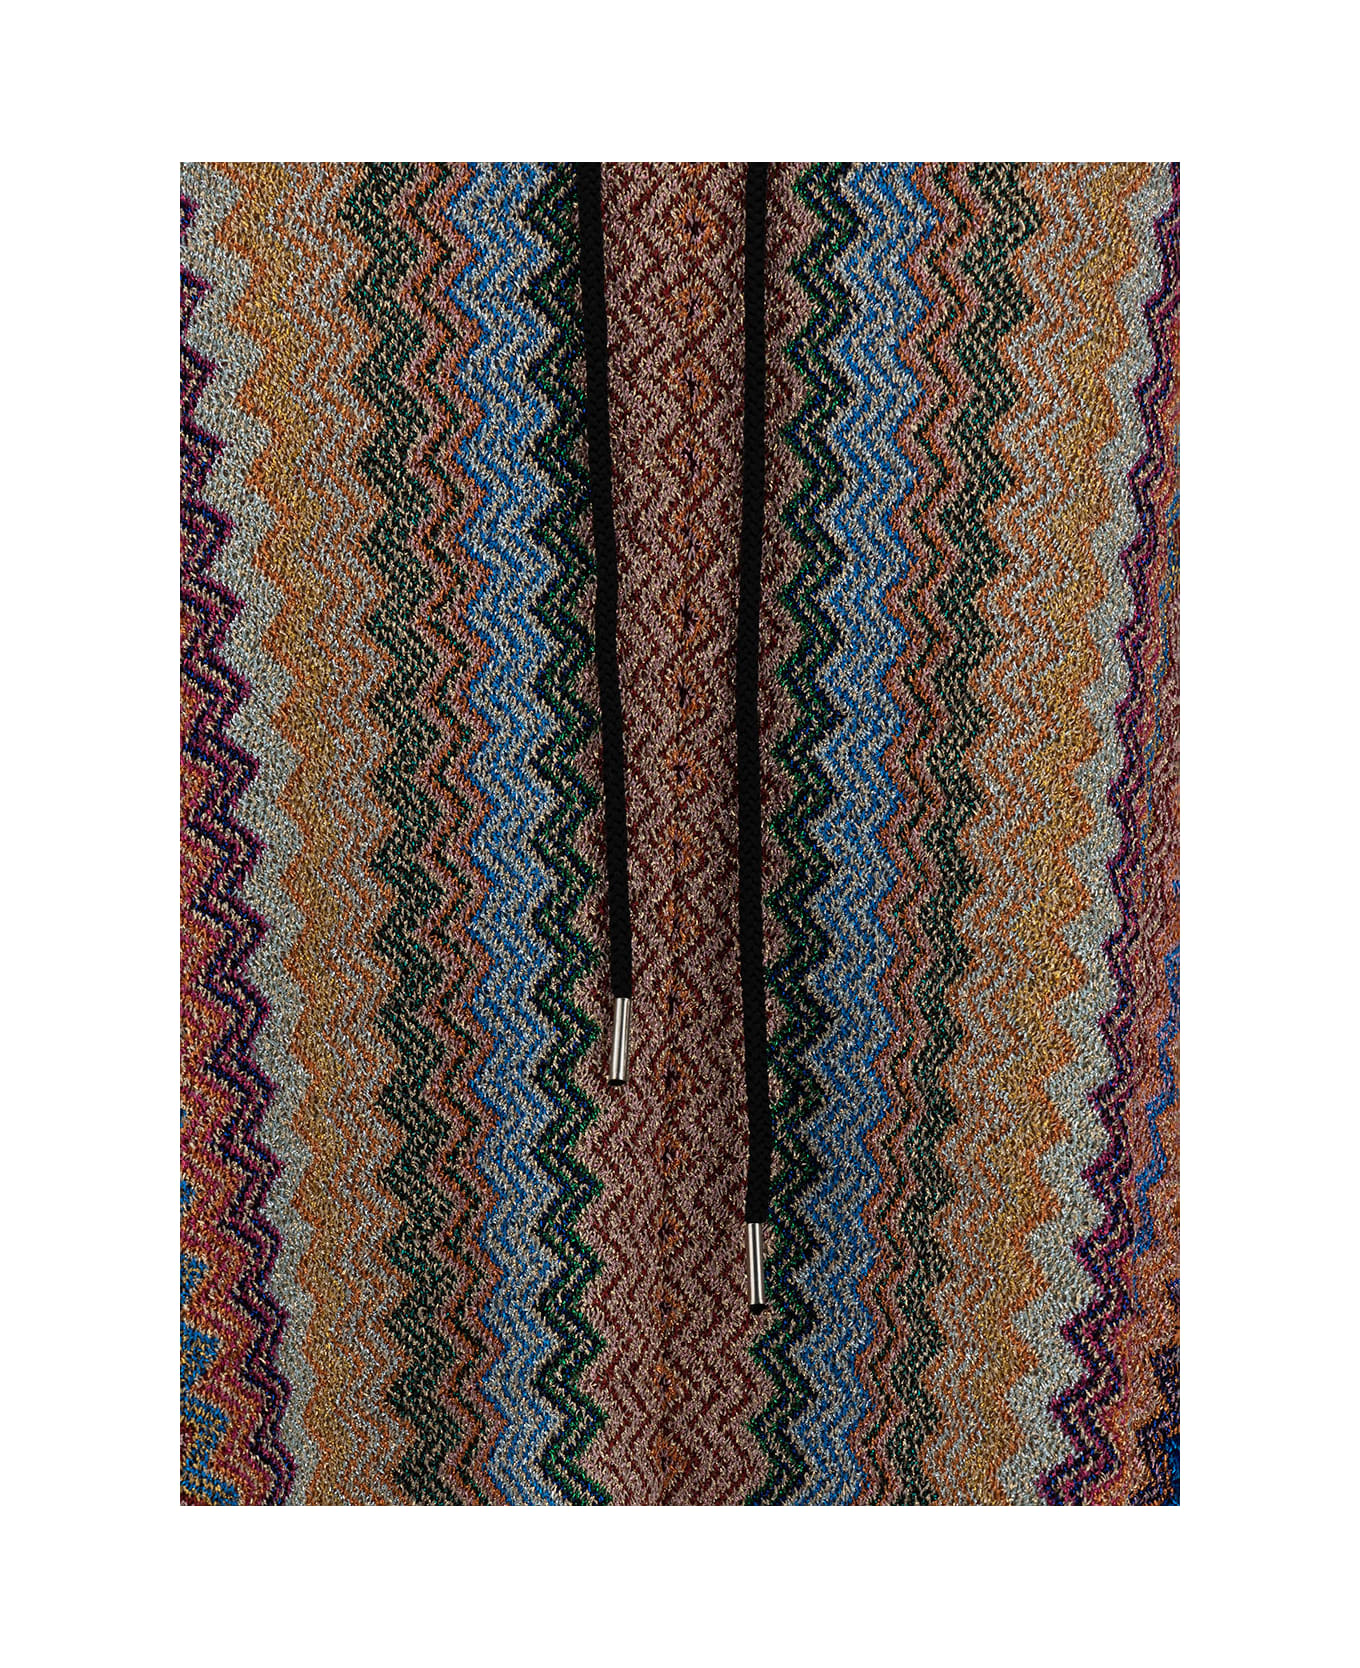 Missoni Multicolor Hooded Poncho With Zigzag Motif In Viscose Blend Woman Missoni - Multicolor